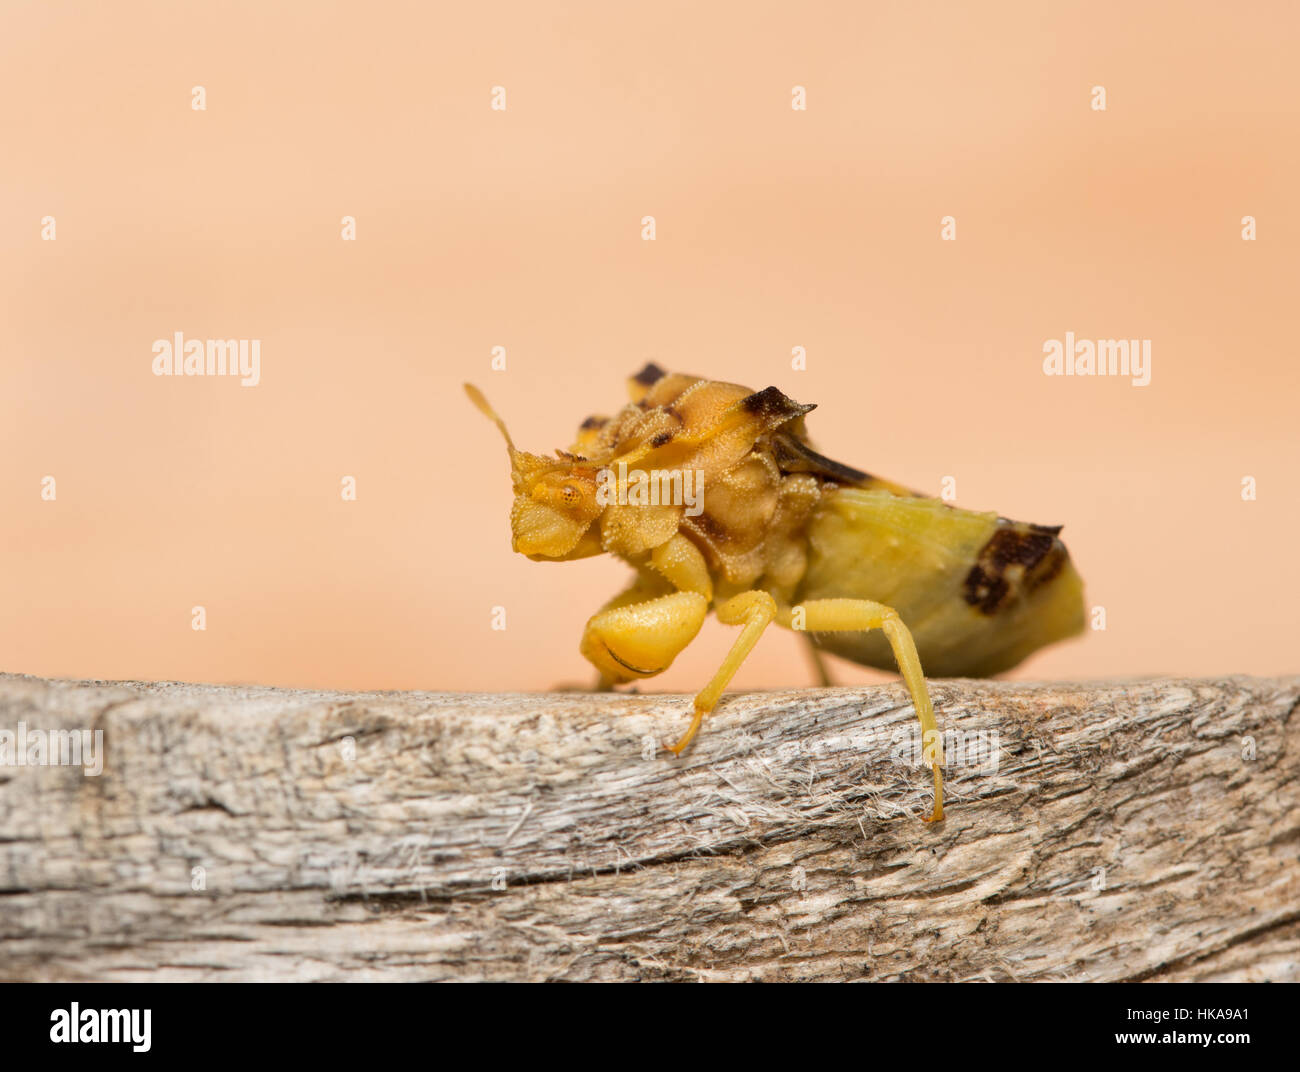 Pre-historic looking Jagged Ambush Bug on a piece of wood Stock Photo